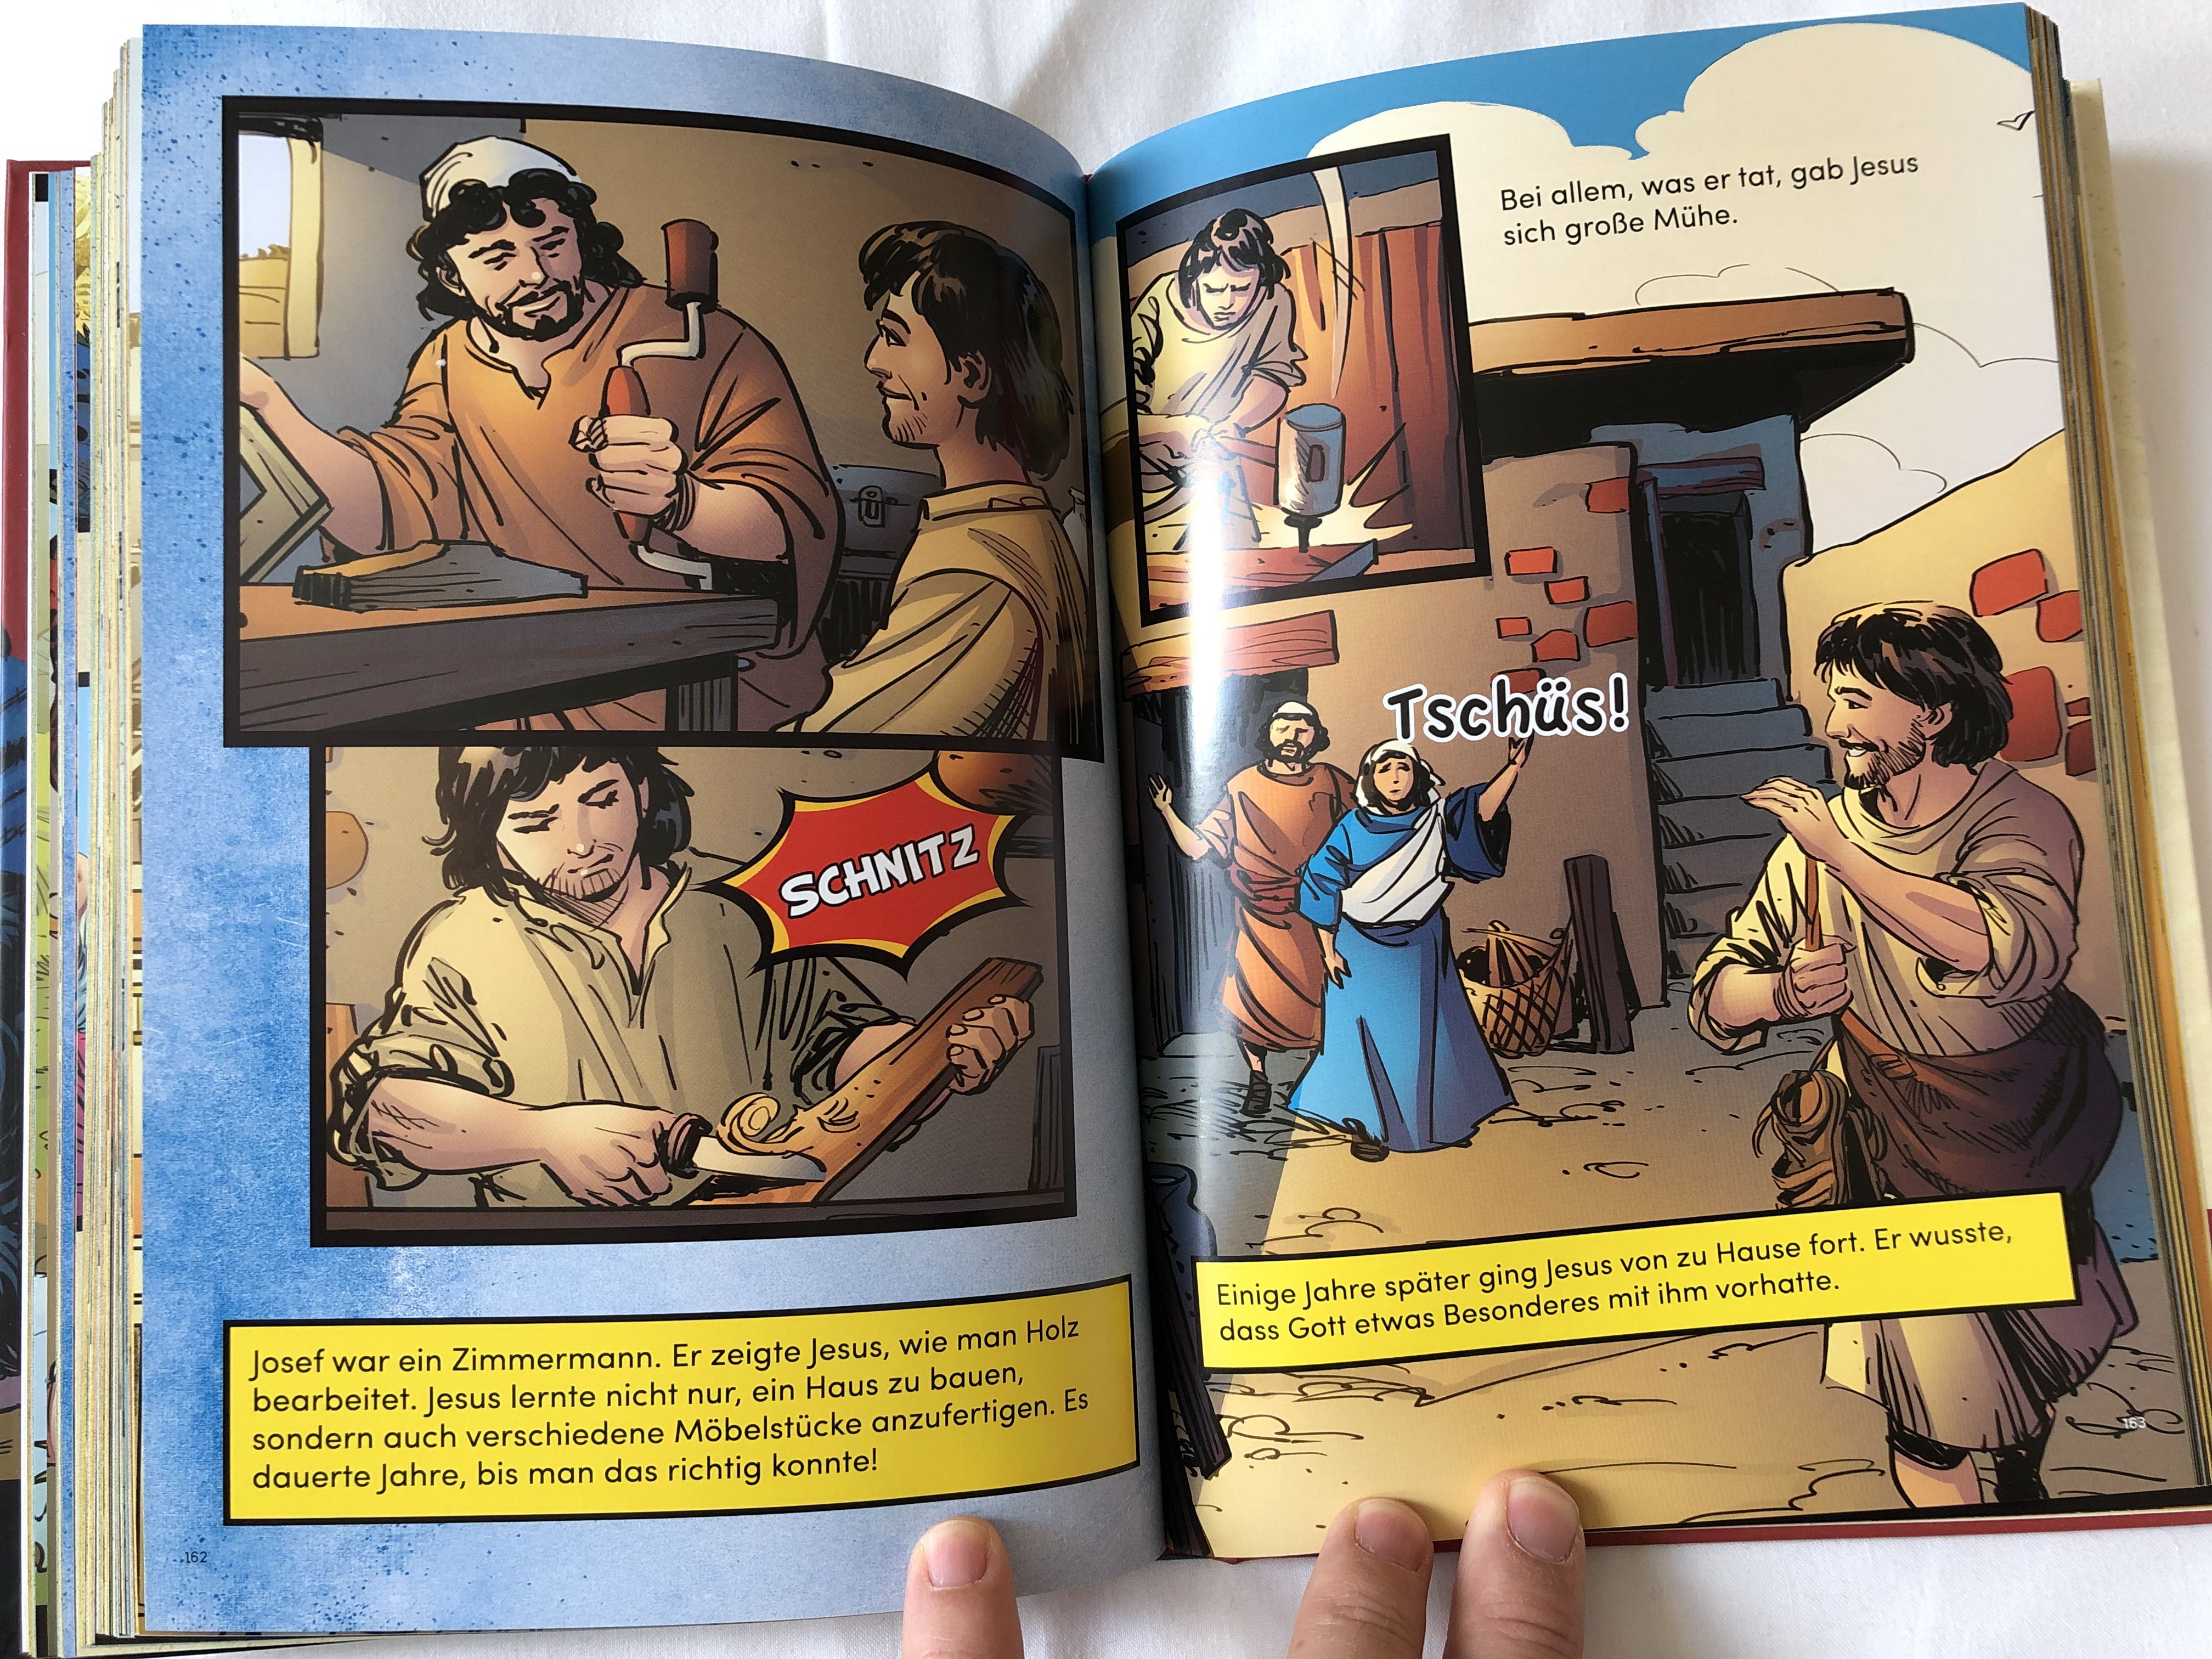 die-action-comic-kinderbibel-by-catherine-devries-sergio-cariello-illustrations-german-translation-of-the-action-storybook-bible-more-than-350-color-illustrations-ages-5-and-up-hardcover-12-.jpg